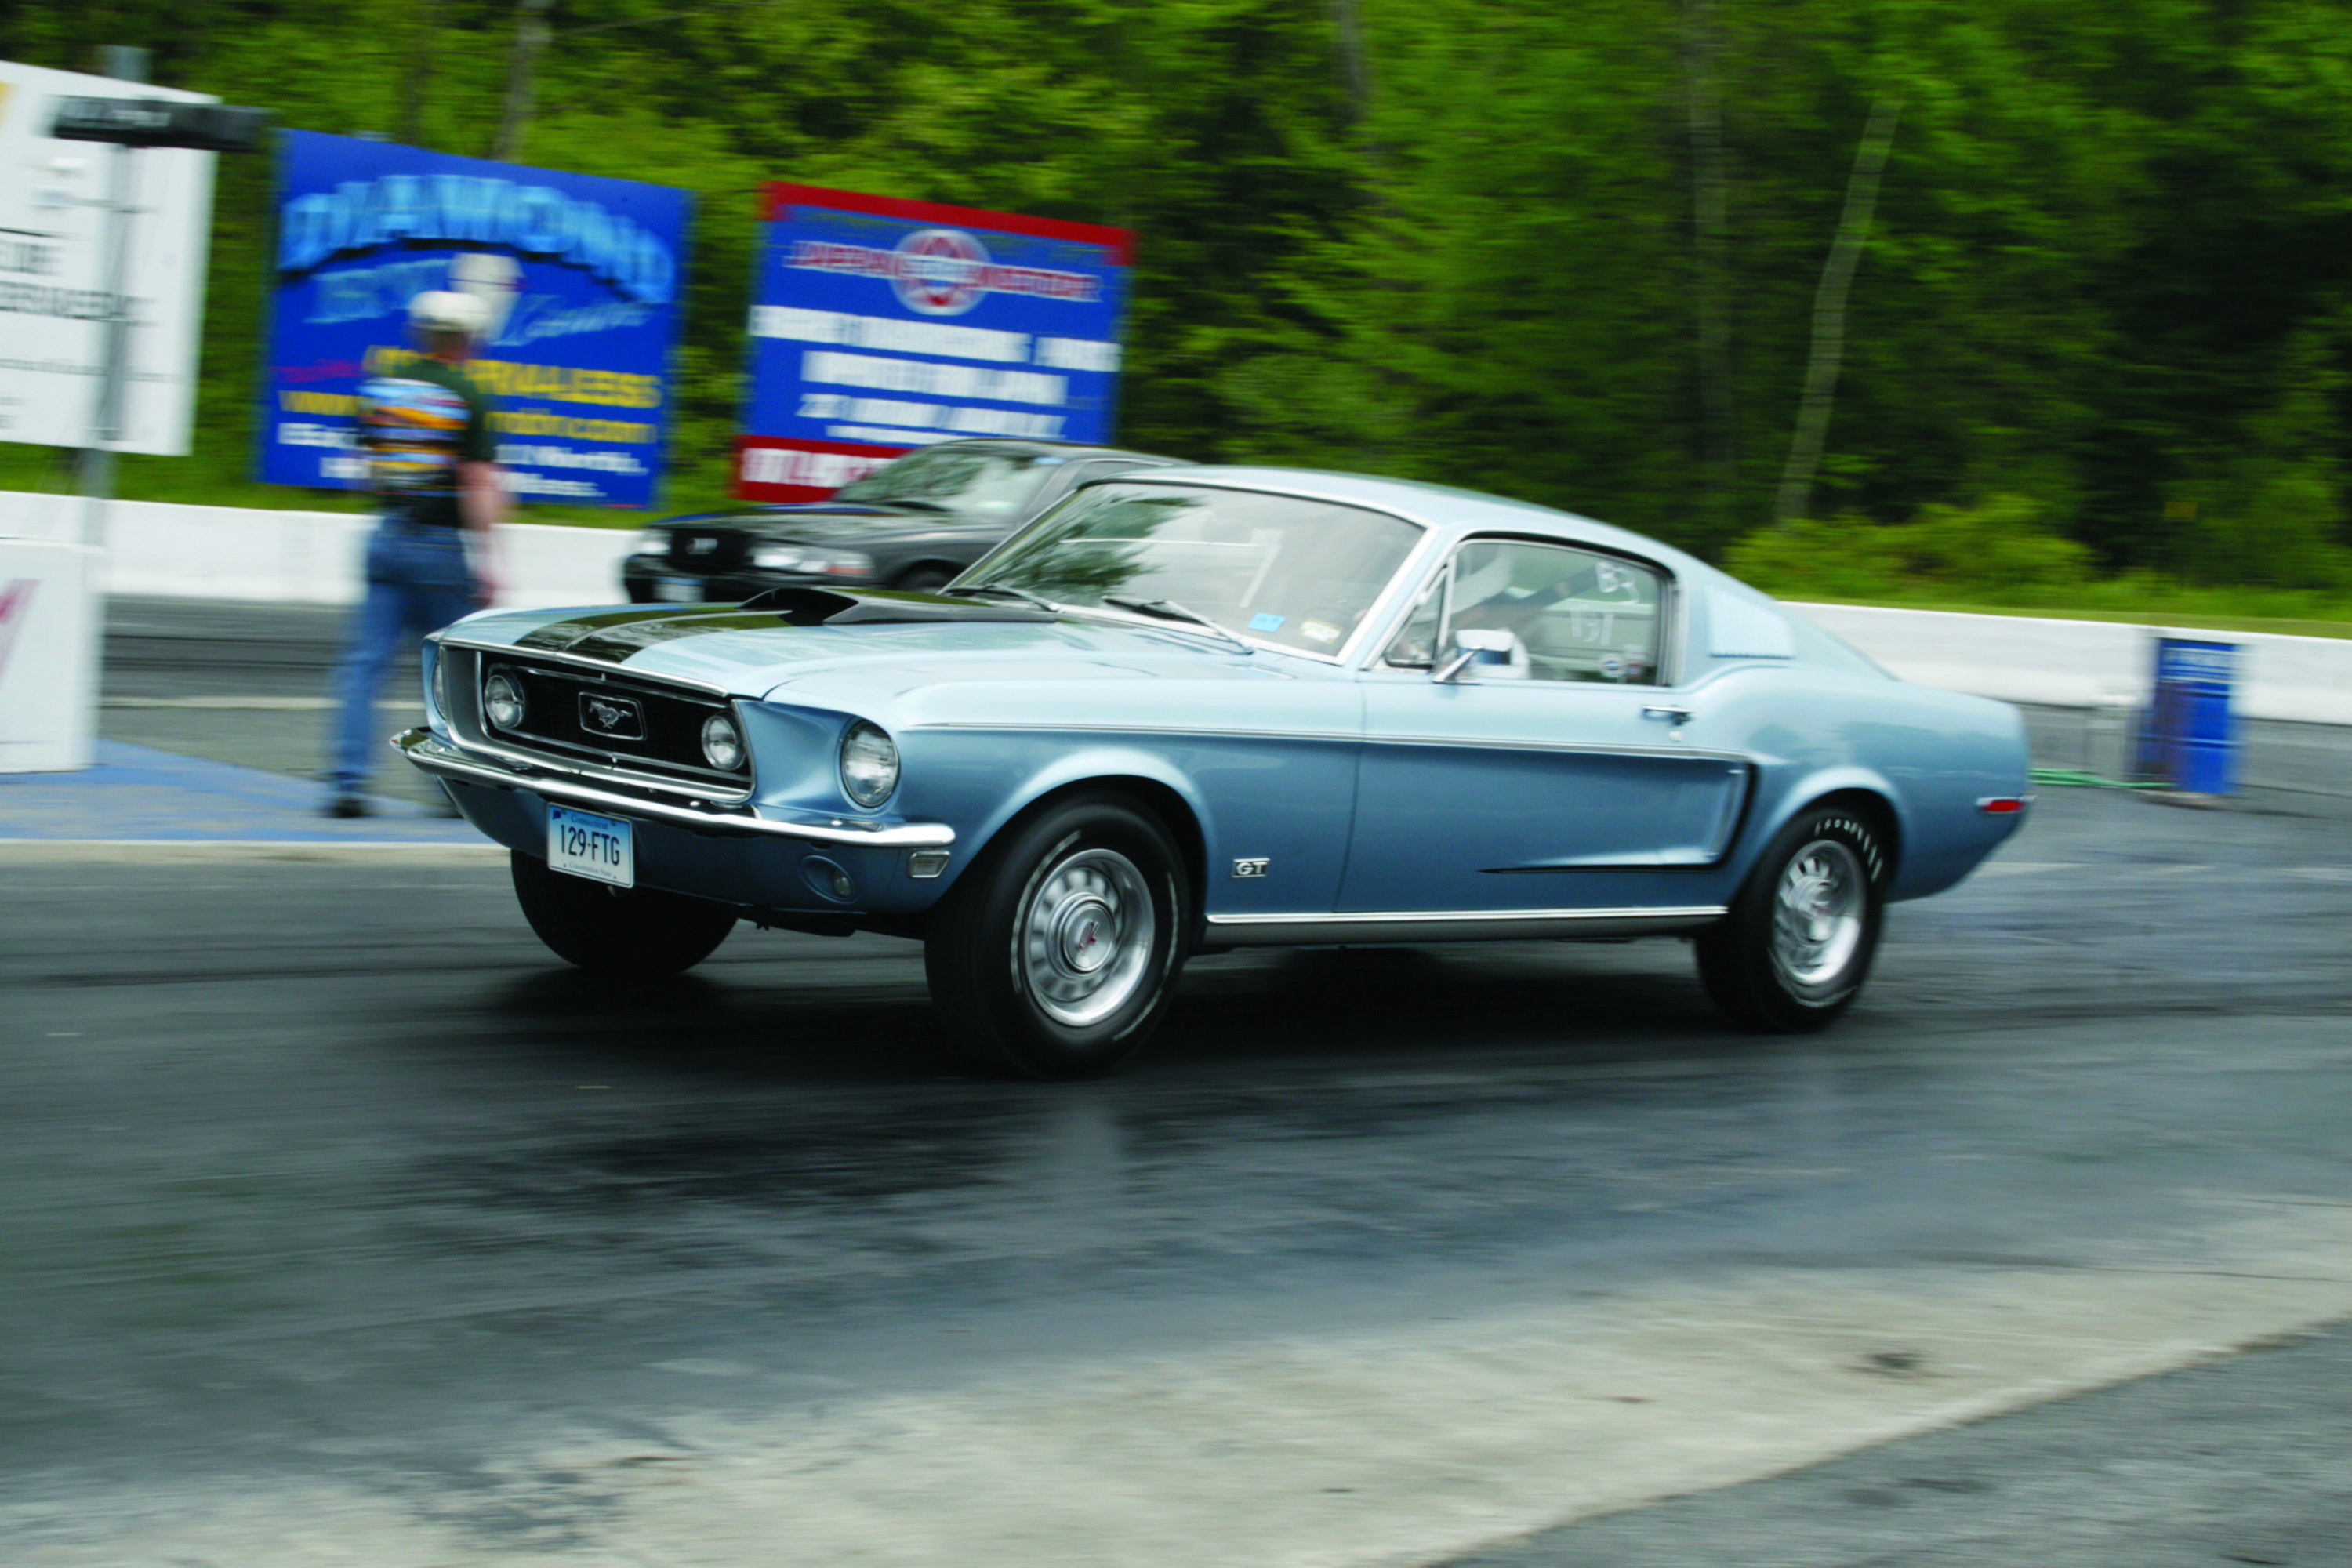 Buyer's Guide: 1968 Ford Mustang Cobra Jet